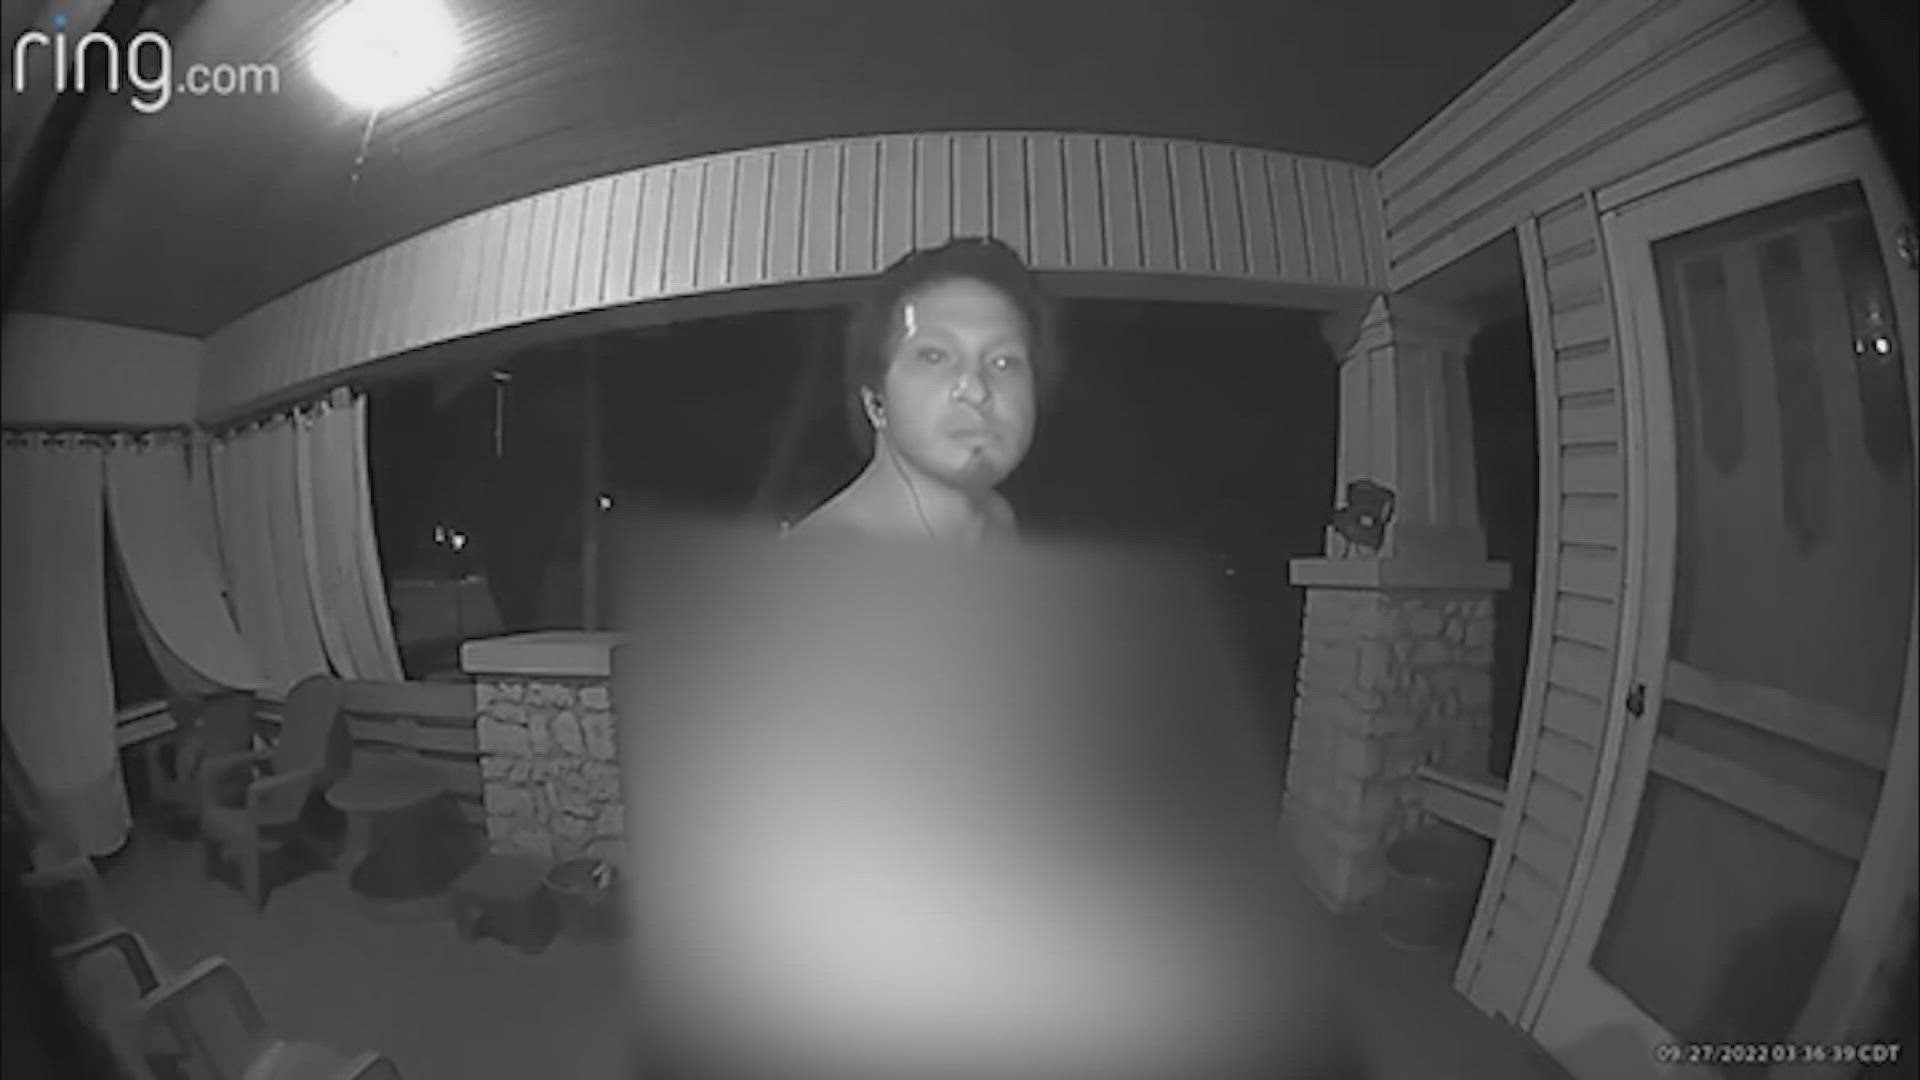 Highland Park residents want man charged after he was caught on camera, naked on a stranger's porch.